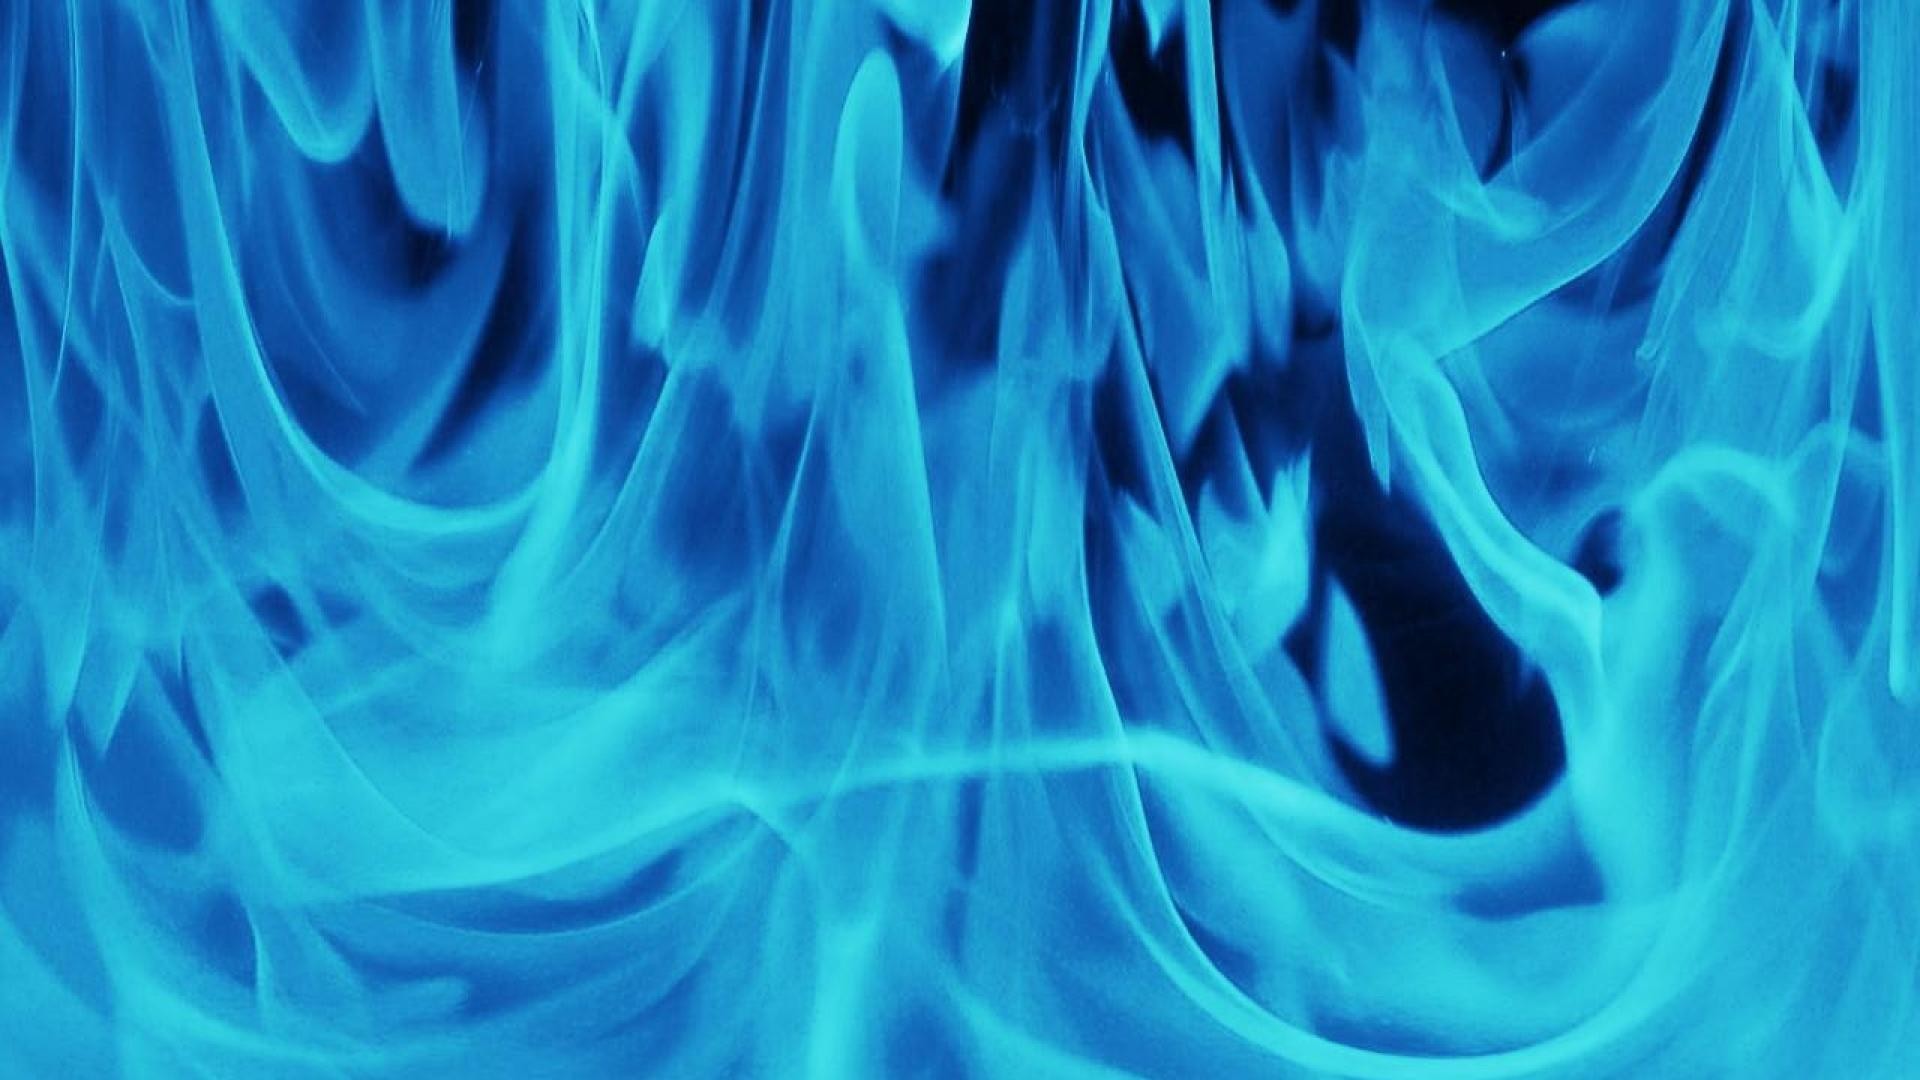 1920x1080 Blue fire - (#60139) - High Quality and Resolution Wallpapers on .